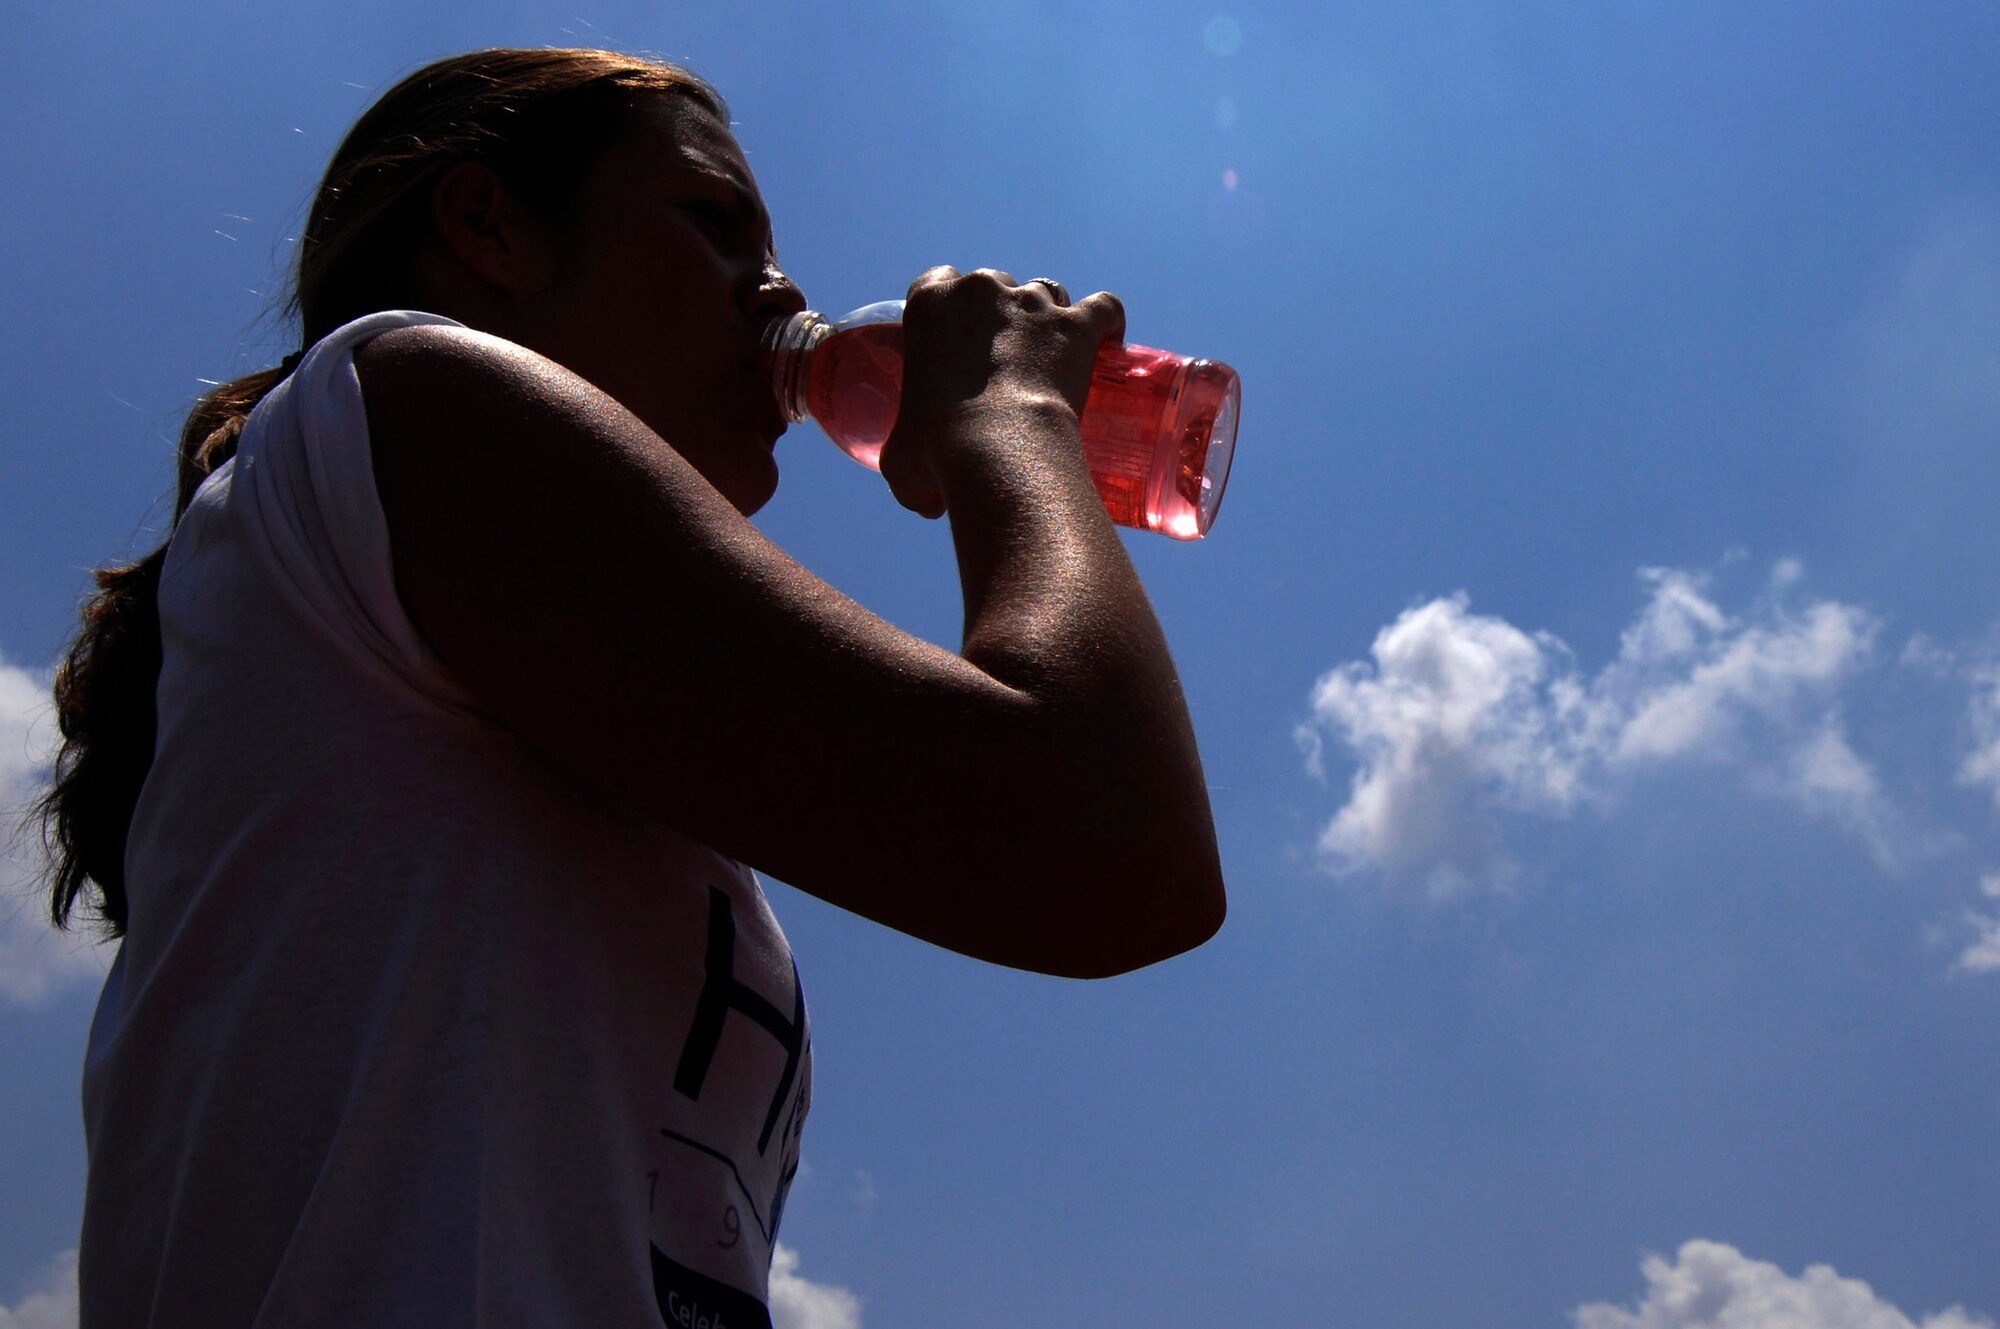 Senior Airman Nikki Brisco, 39th Security Forces Squadron, momentarily stops running laps during the Relay for Life to enjoy a cold sports drink at the Incirlik running track, May 9, 2009. The 2009 Relay for Life was the first relay available to members of the Incirlik community and hosted more than 300 participants from 20 teams, raising more than $9,500. The event lasted 12 hours and included a luminaria ceremony in which participants wrote the names of cancer survivors and victims on more than 100 luminary bags. (U.S. Air Force photo/Senior Airman Benjamin Wilson)